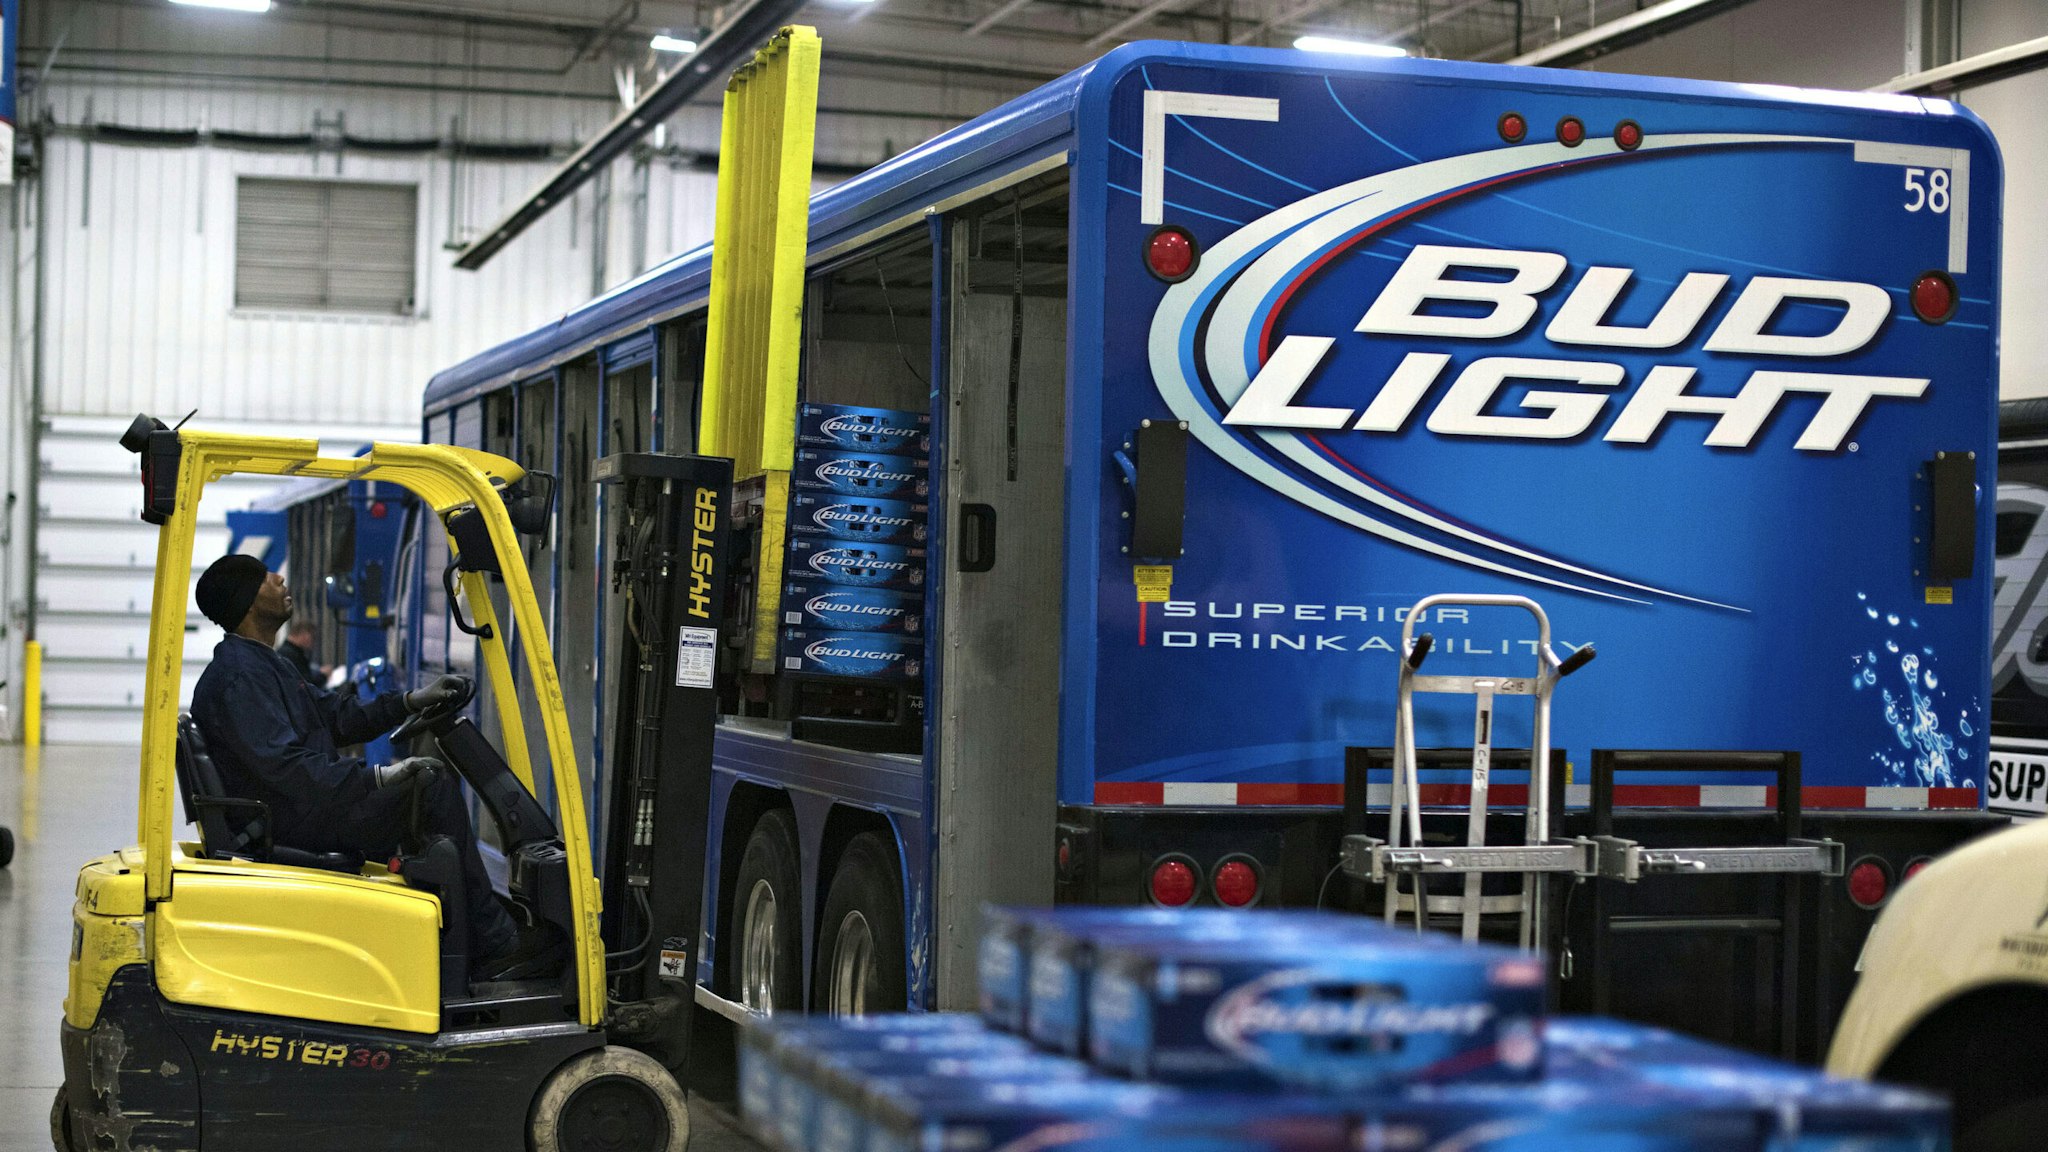 Cases of Anheuser-Busch Bud Light brand beer are loaded into a delivery truck at Brewers Distributing Co. in Peoria, Illinois, U.S., on Thursday, Oct. 30, 2014. Anheuser-Busch Inbev NV is scheduled to report third-quarter earnings on Oct. 31.